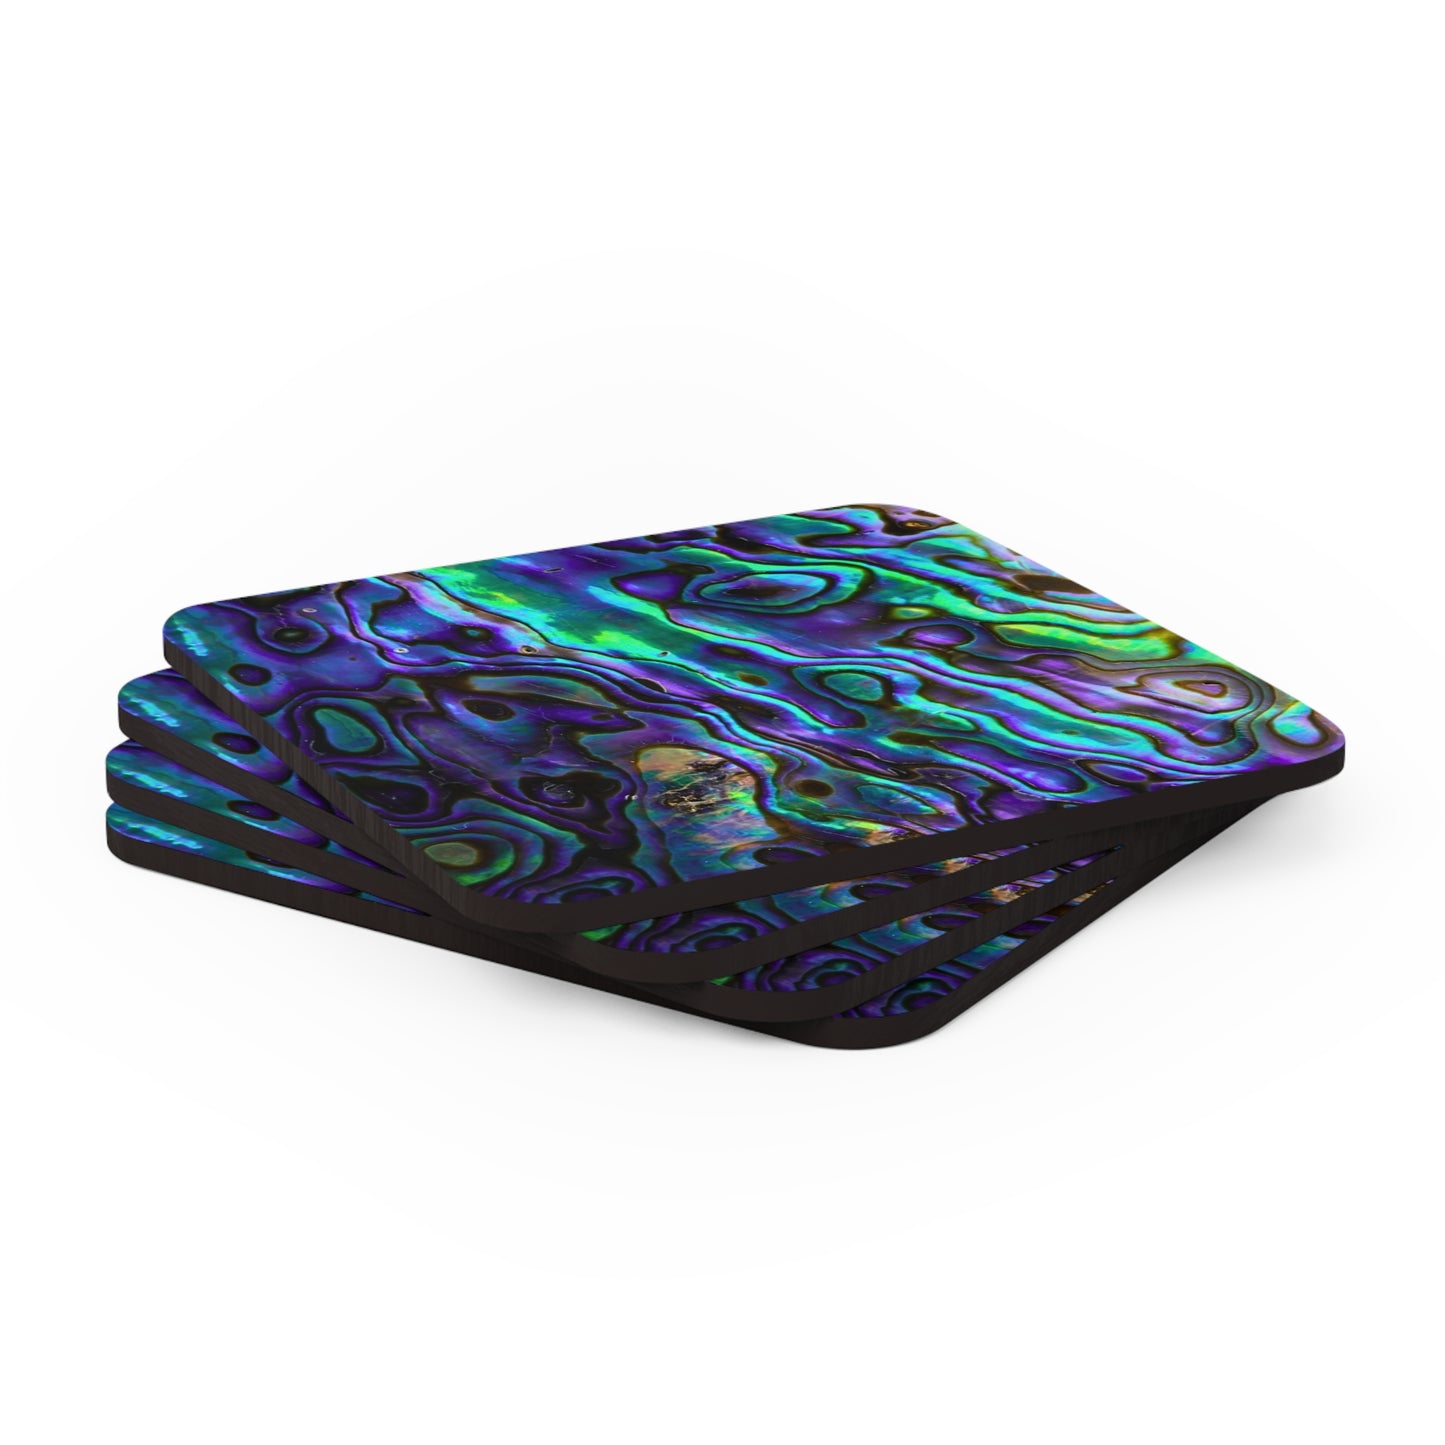 Abalone Jewels Natural Shell Ocean Abstract Cocktail Party Beverage Entertaining Decorative Corkwood Coaster Set